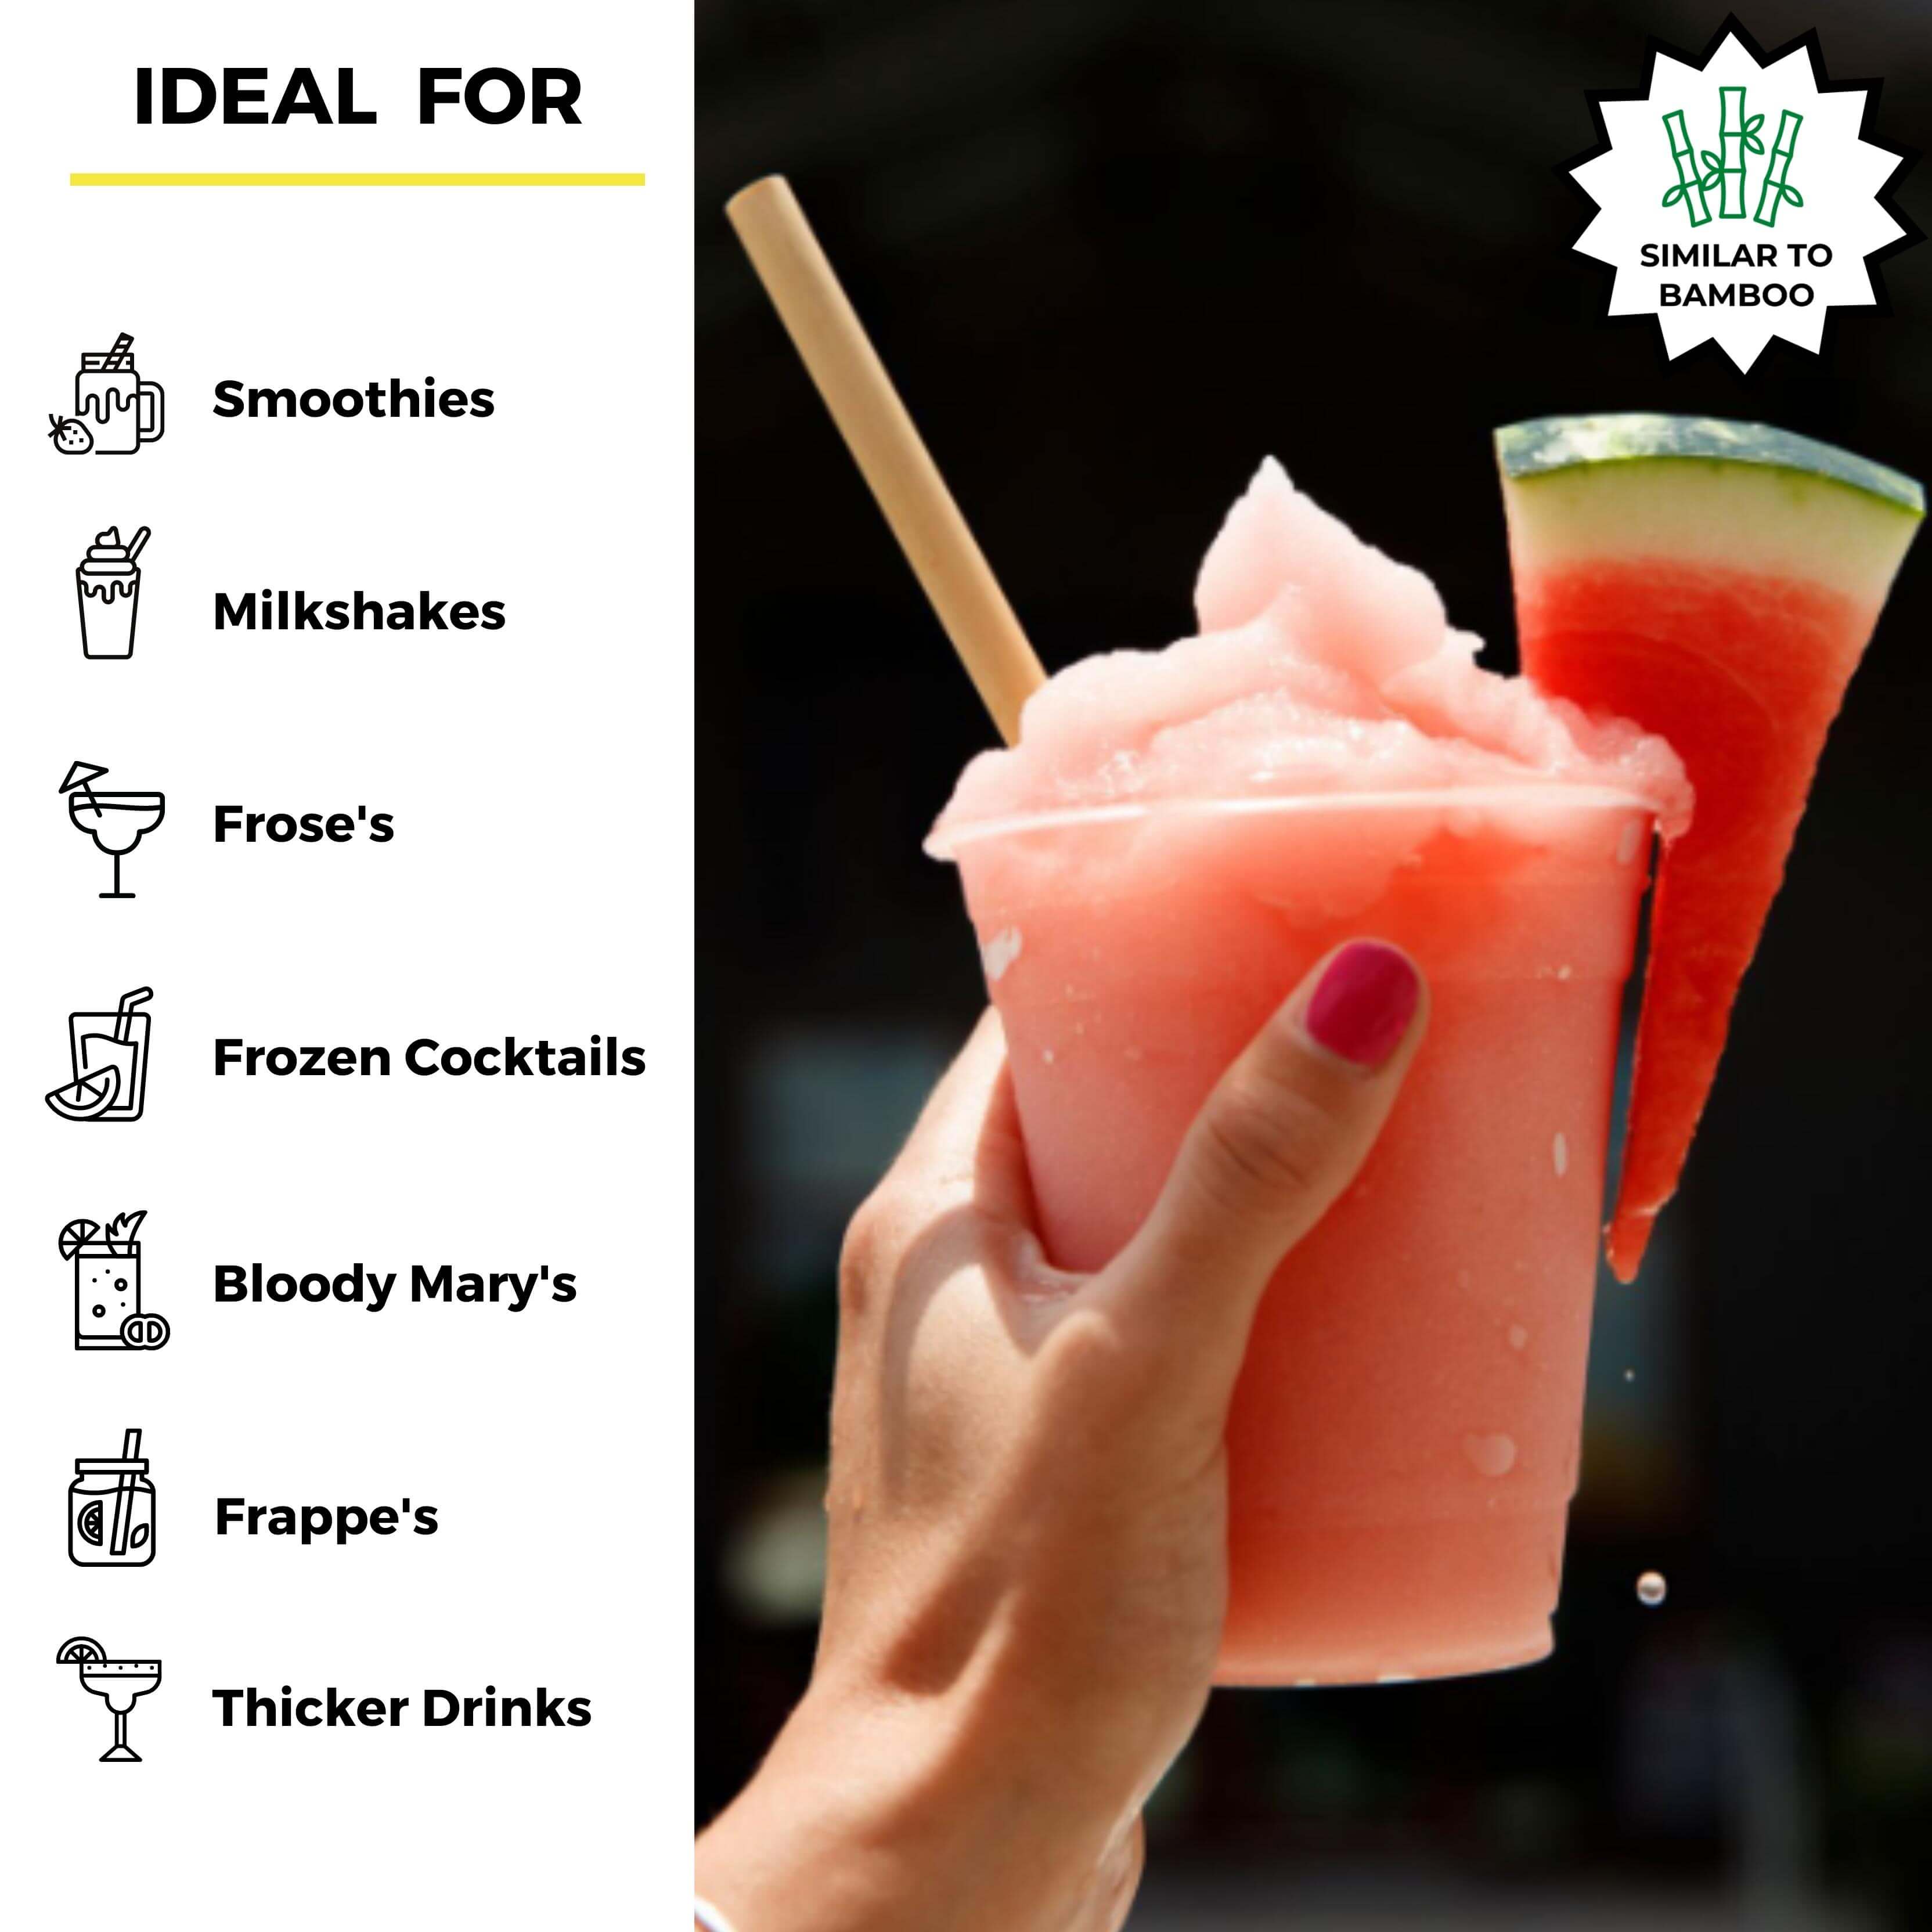 A hand with pink nail polish holds a bright pink frozen drink garnished with a slice of watermelon. The drink is served in a clear cup with a biodegradable straw made from reed stems. On the left side of the image, icons describe the ideal drinks for using these straws, such as smoothies, milkshakes, frosé, frozen cocktails, Bloody Marys, frappés, and thicker drinks. A badge with 